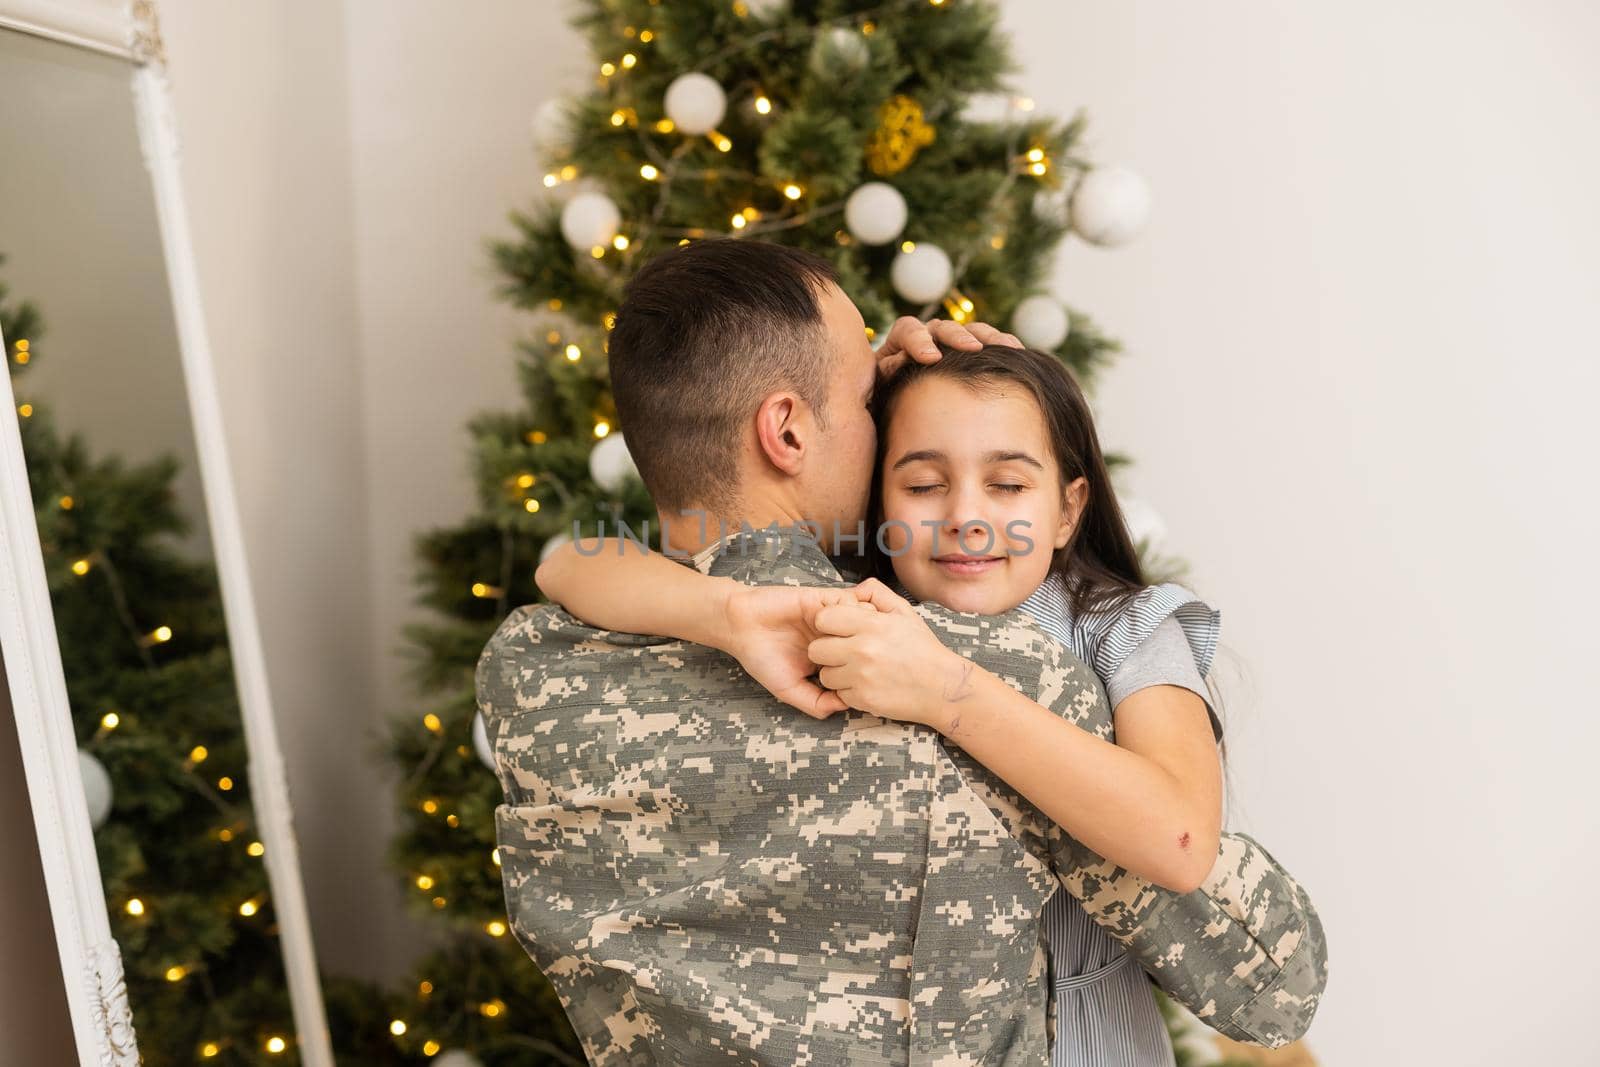 Armed Forces Soldier Hugging his daughter In Front Christmas Tree. by Andelov13